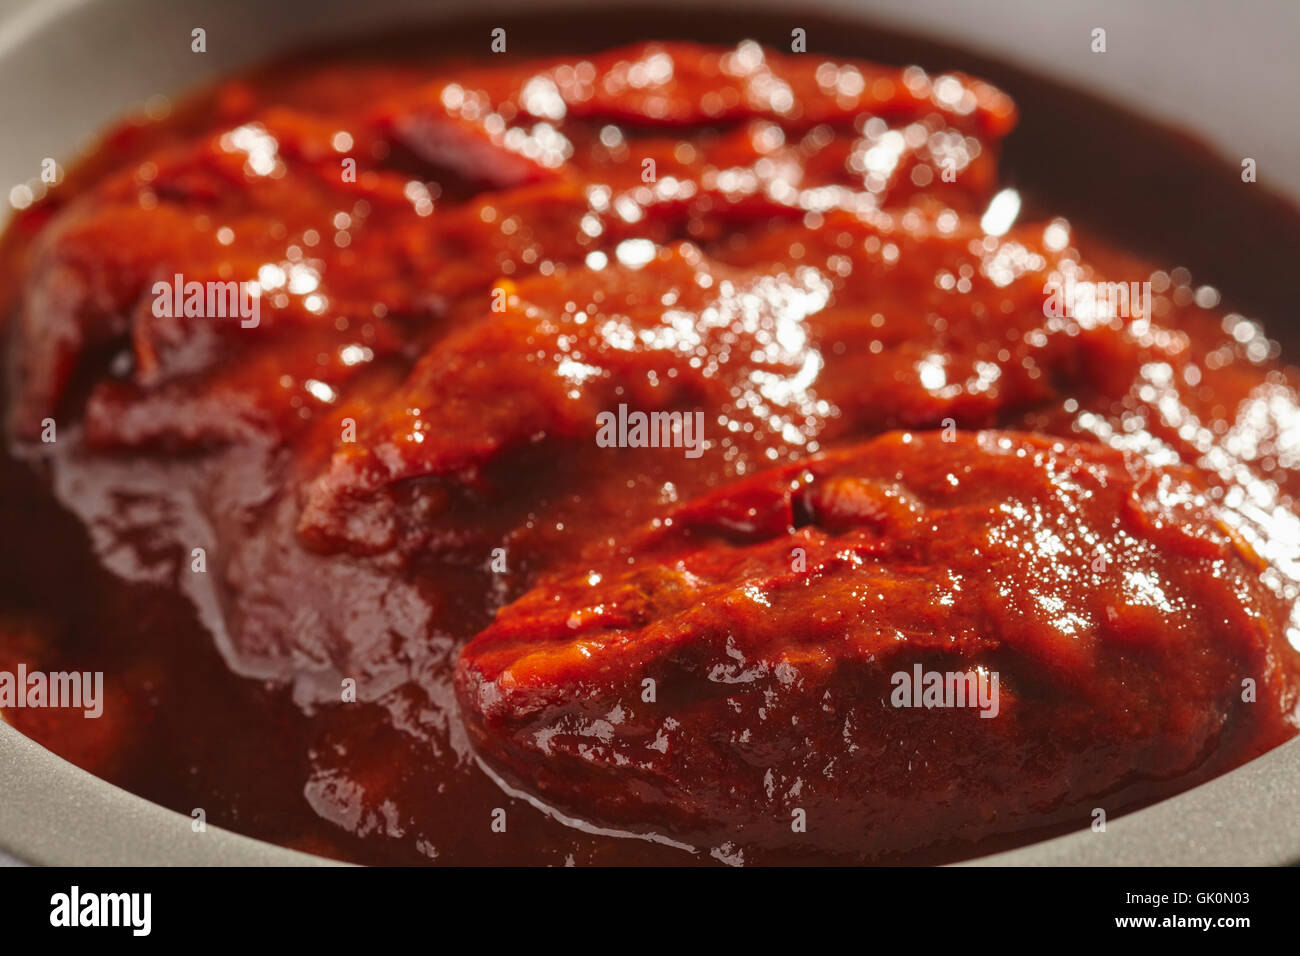 Chipotle Peppers in Adobo Sauce Stock Photo